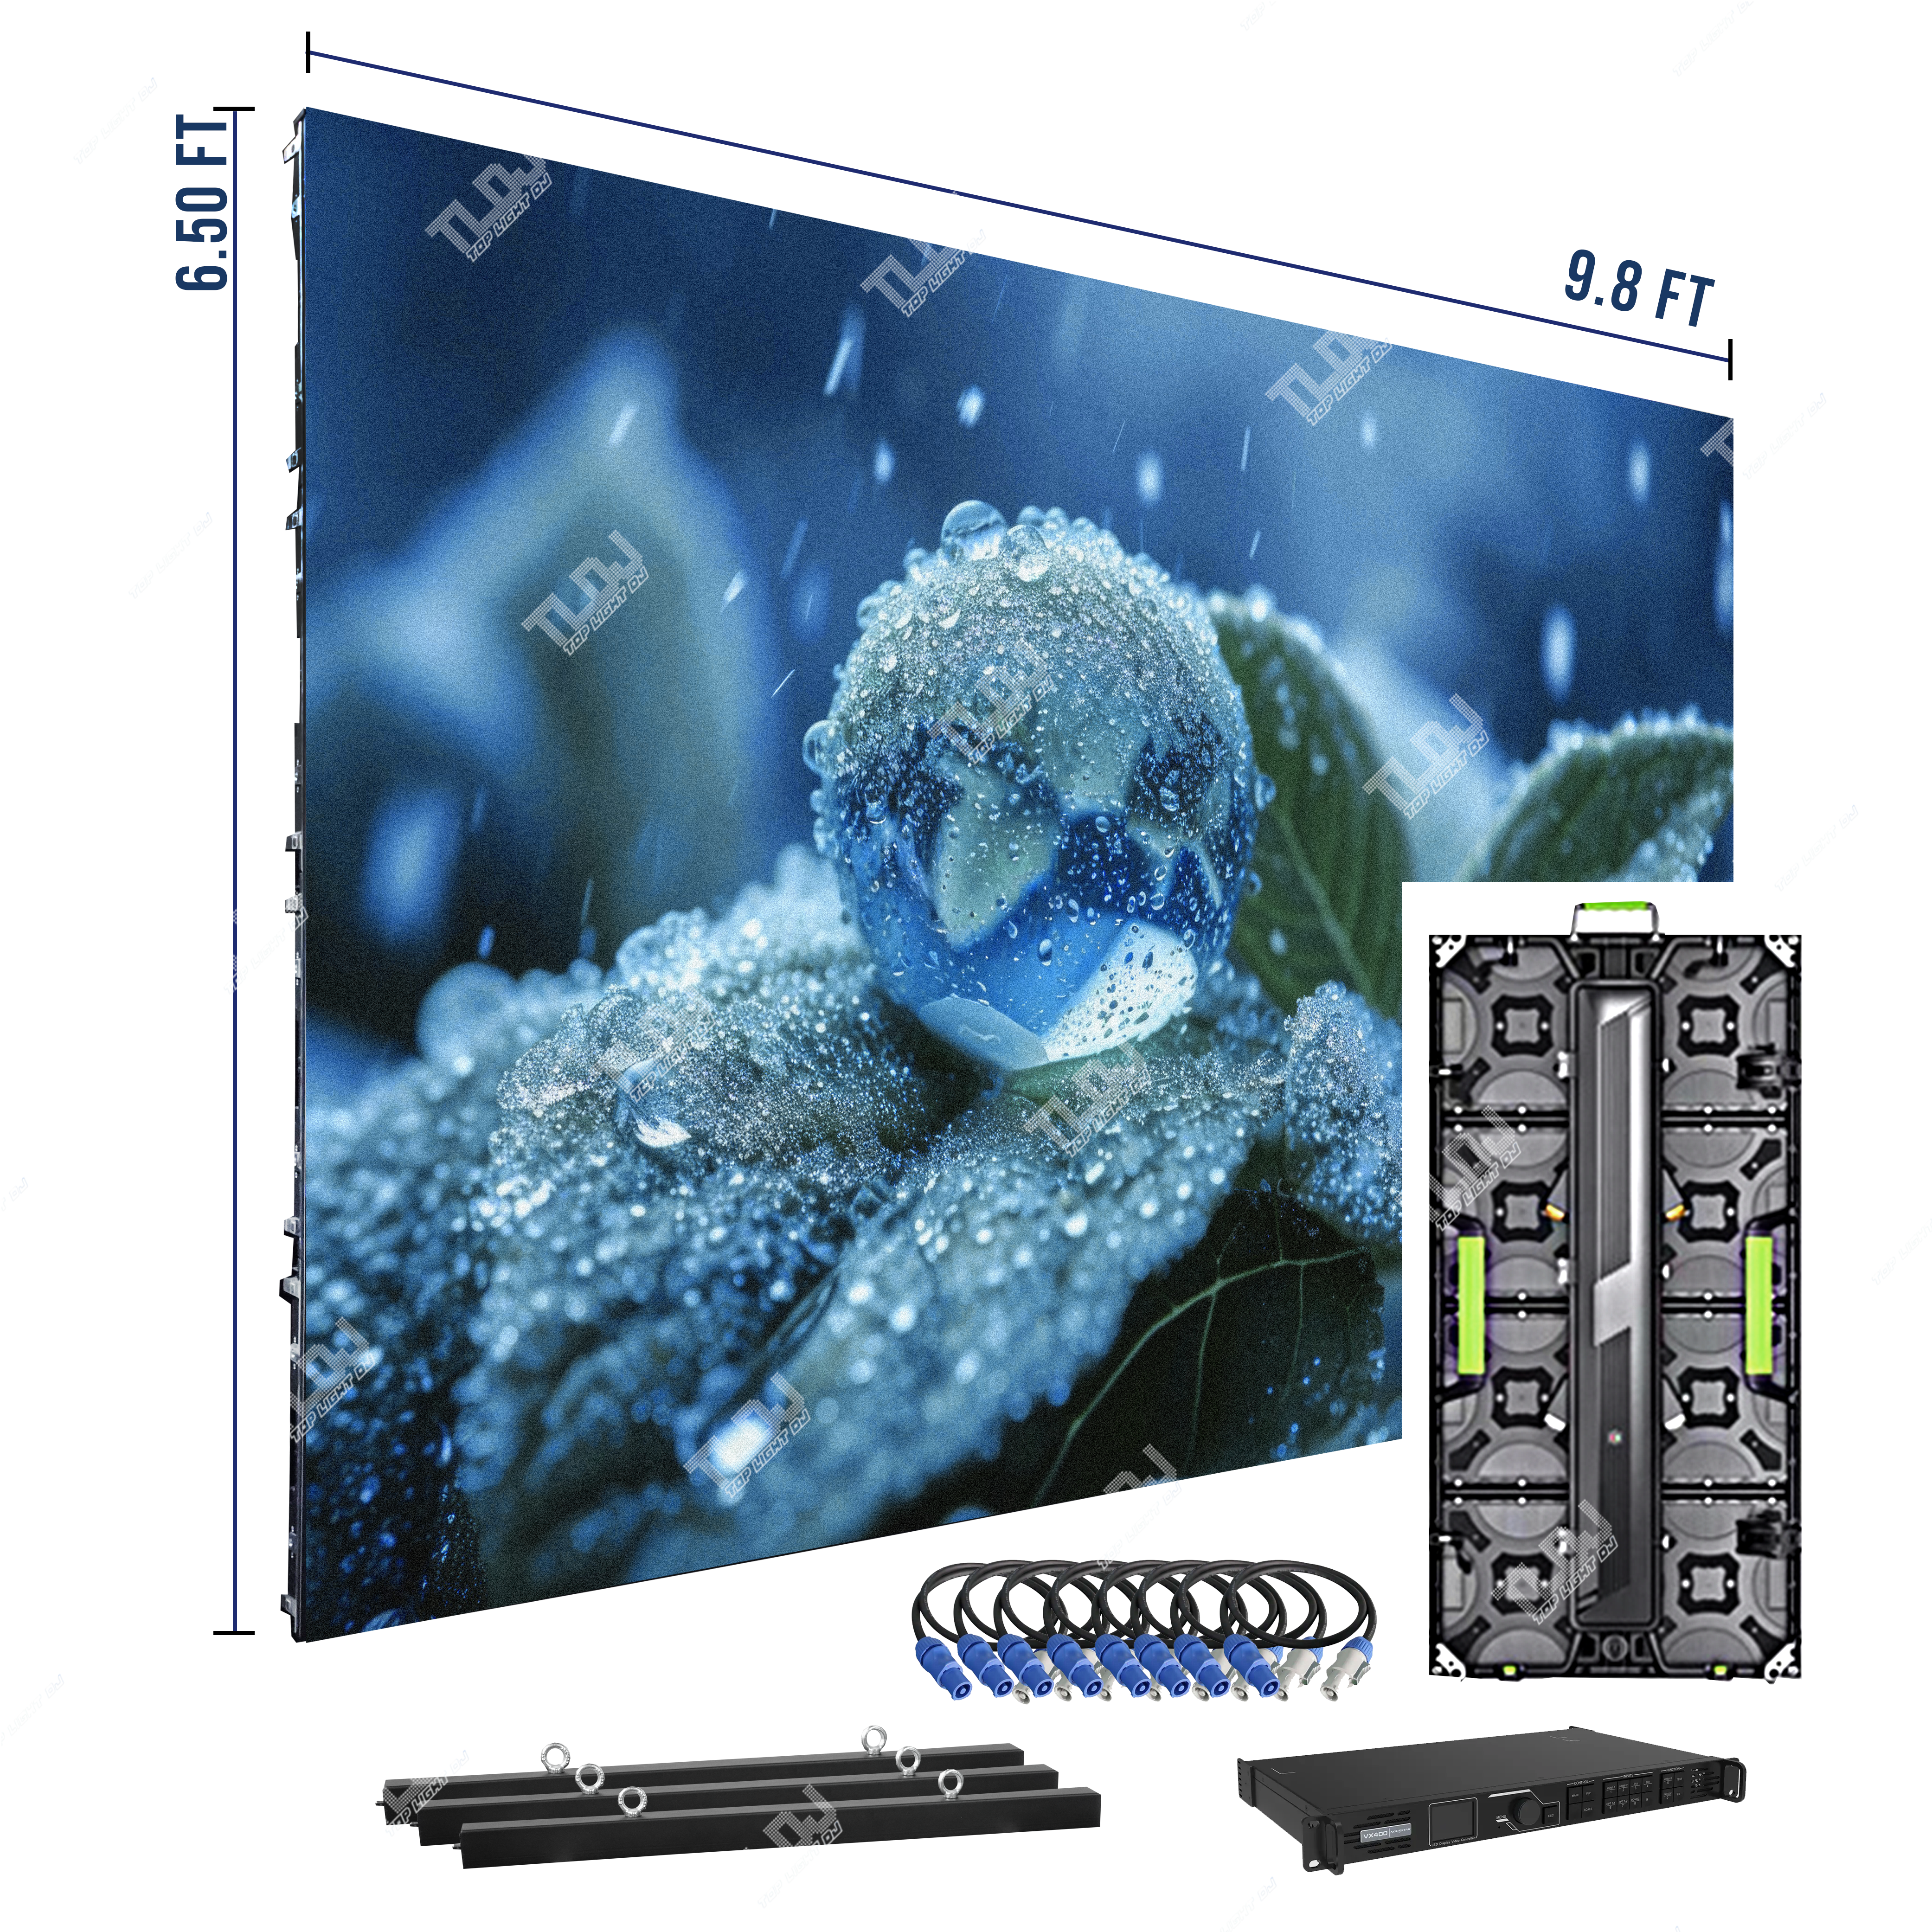 P3.9 9.8ft x 6.5ft LED Indoor Video Wall